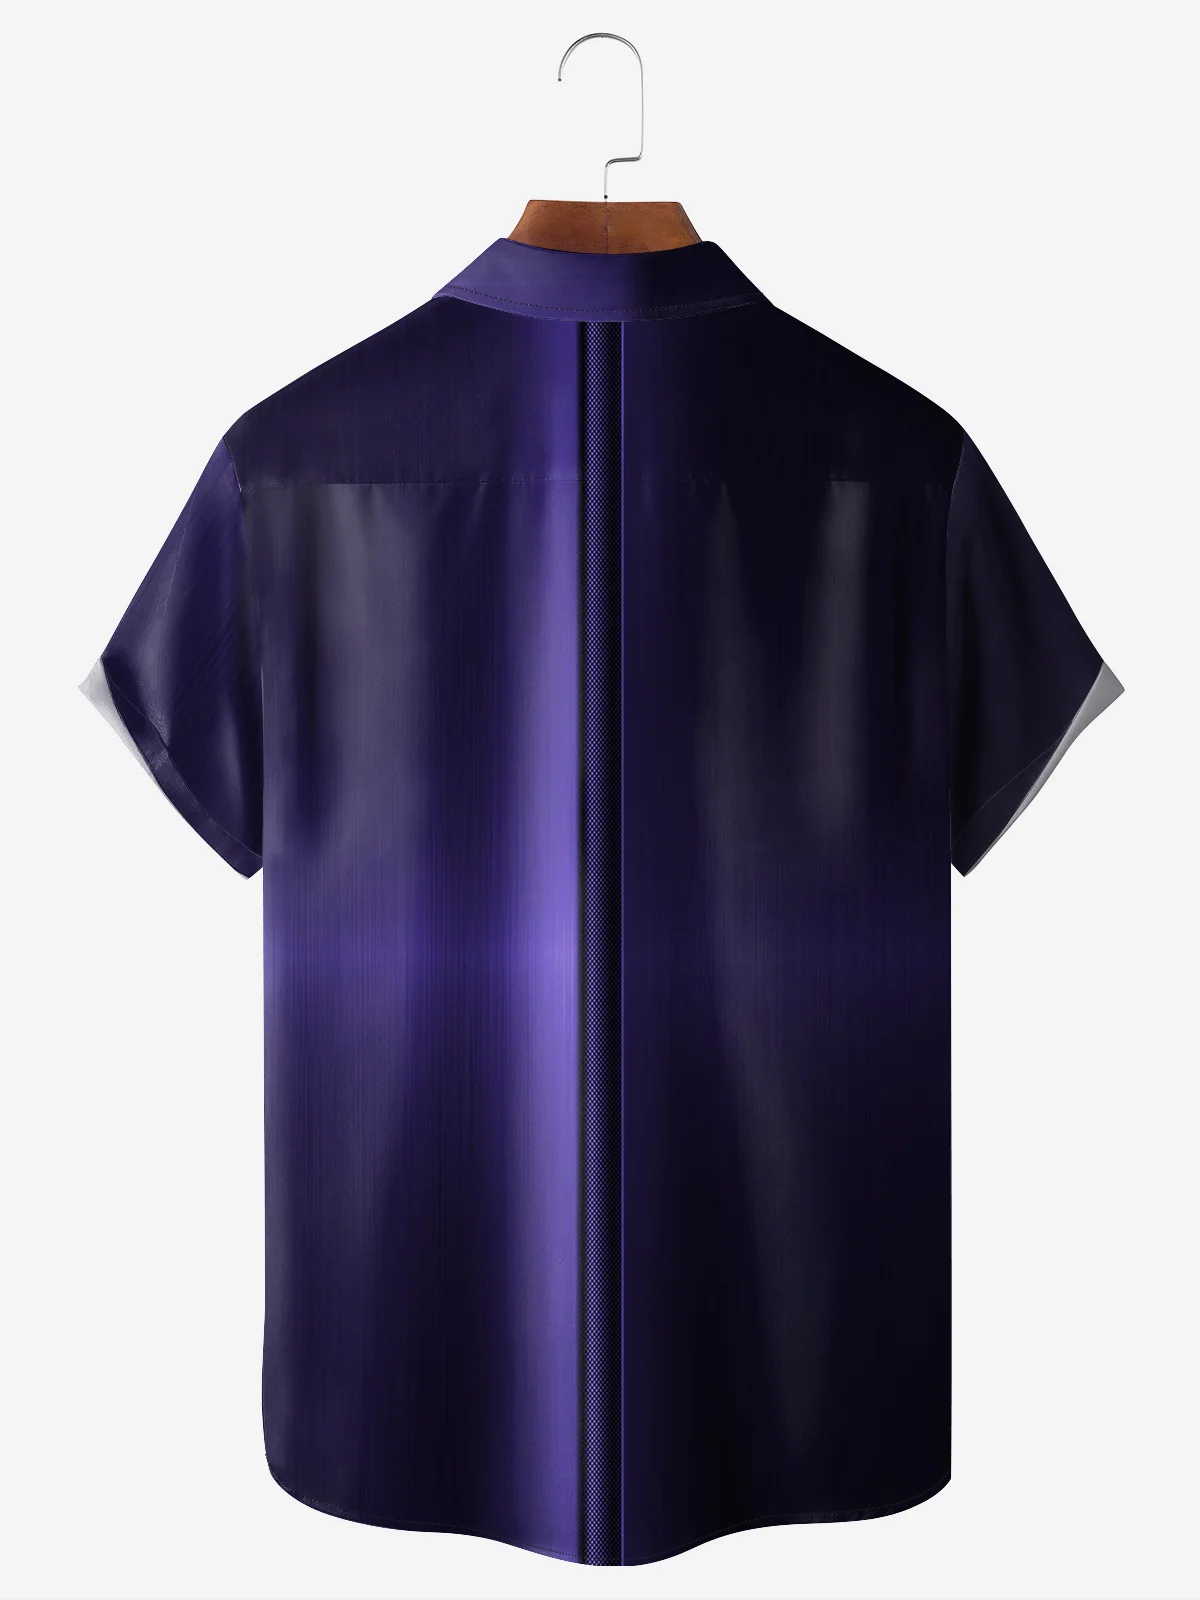 Moisture-wicking Breathable Ombre Chest Pocket Bowling Shirt